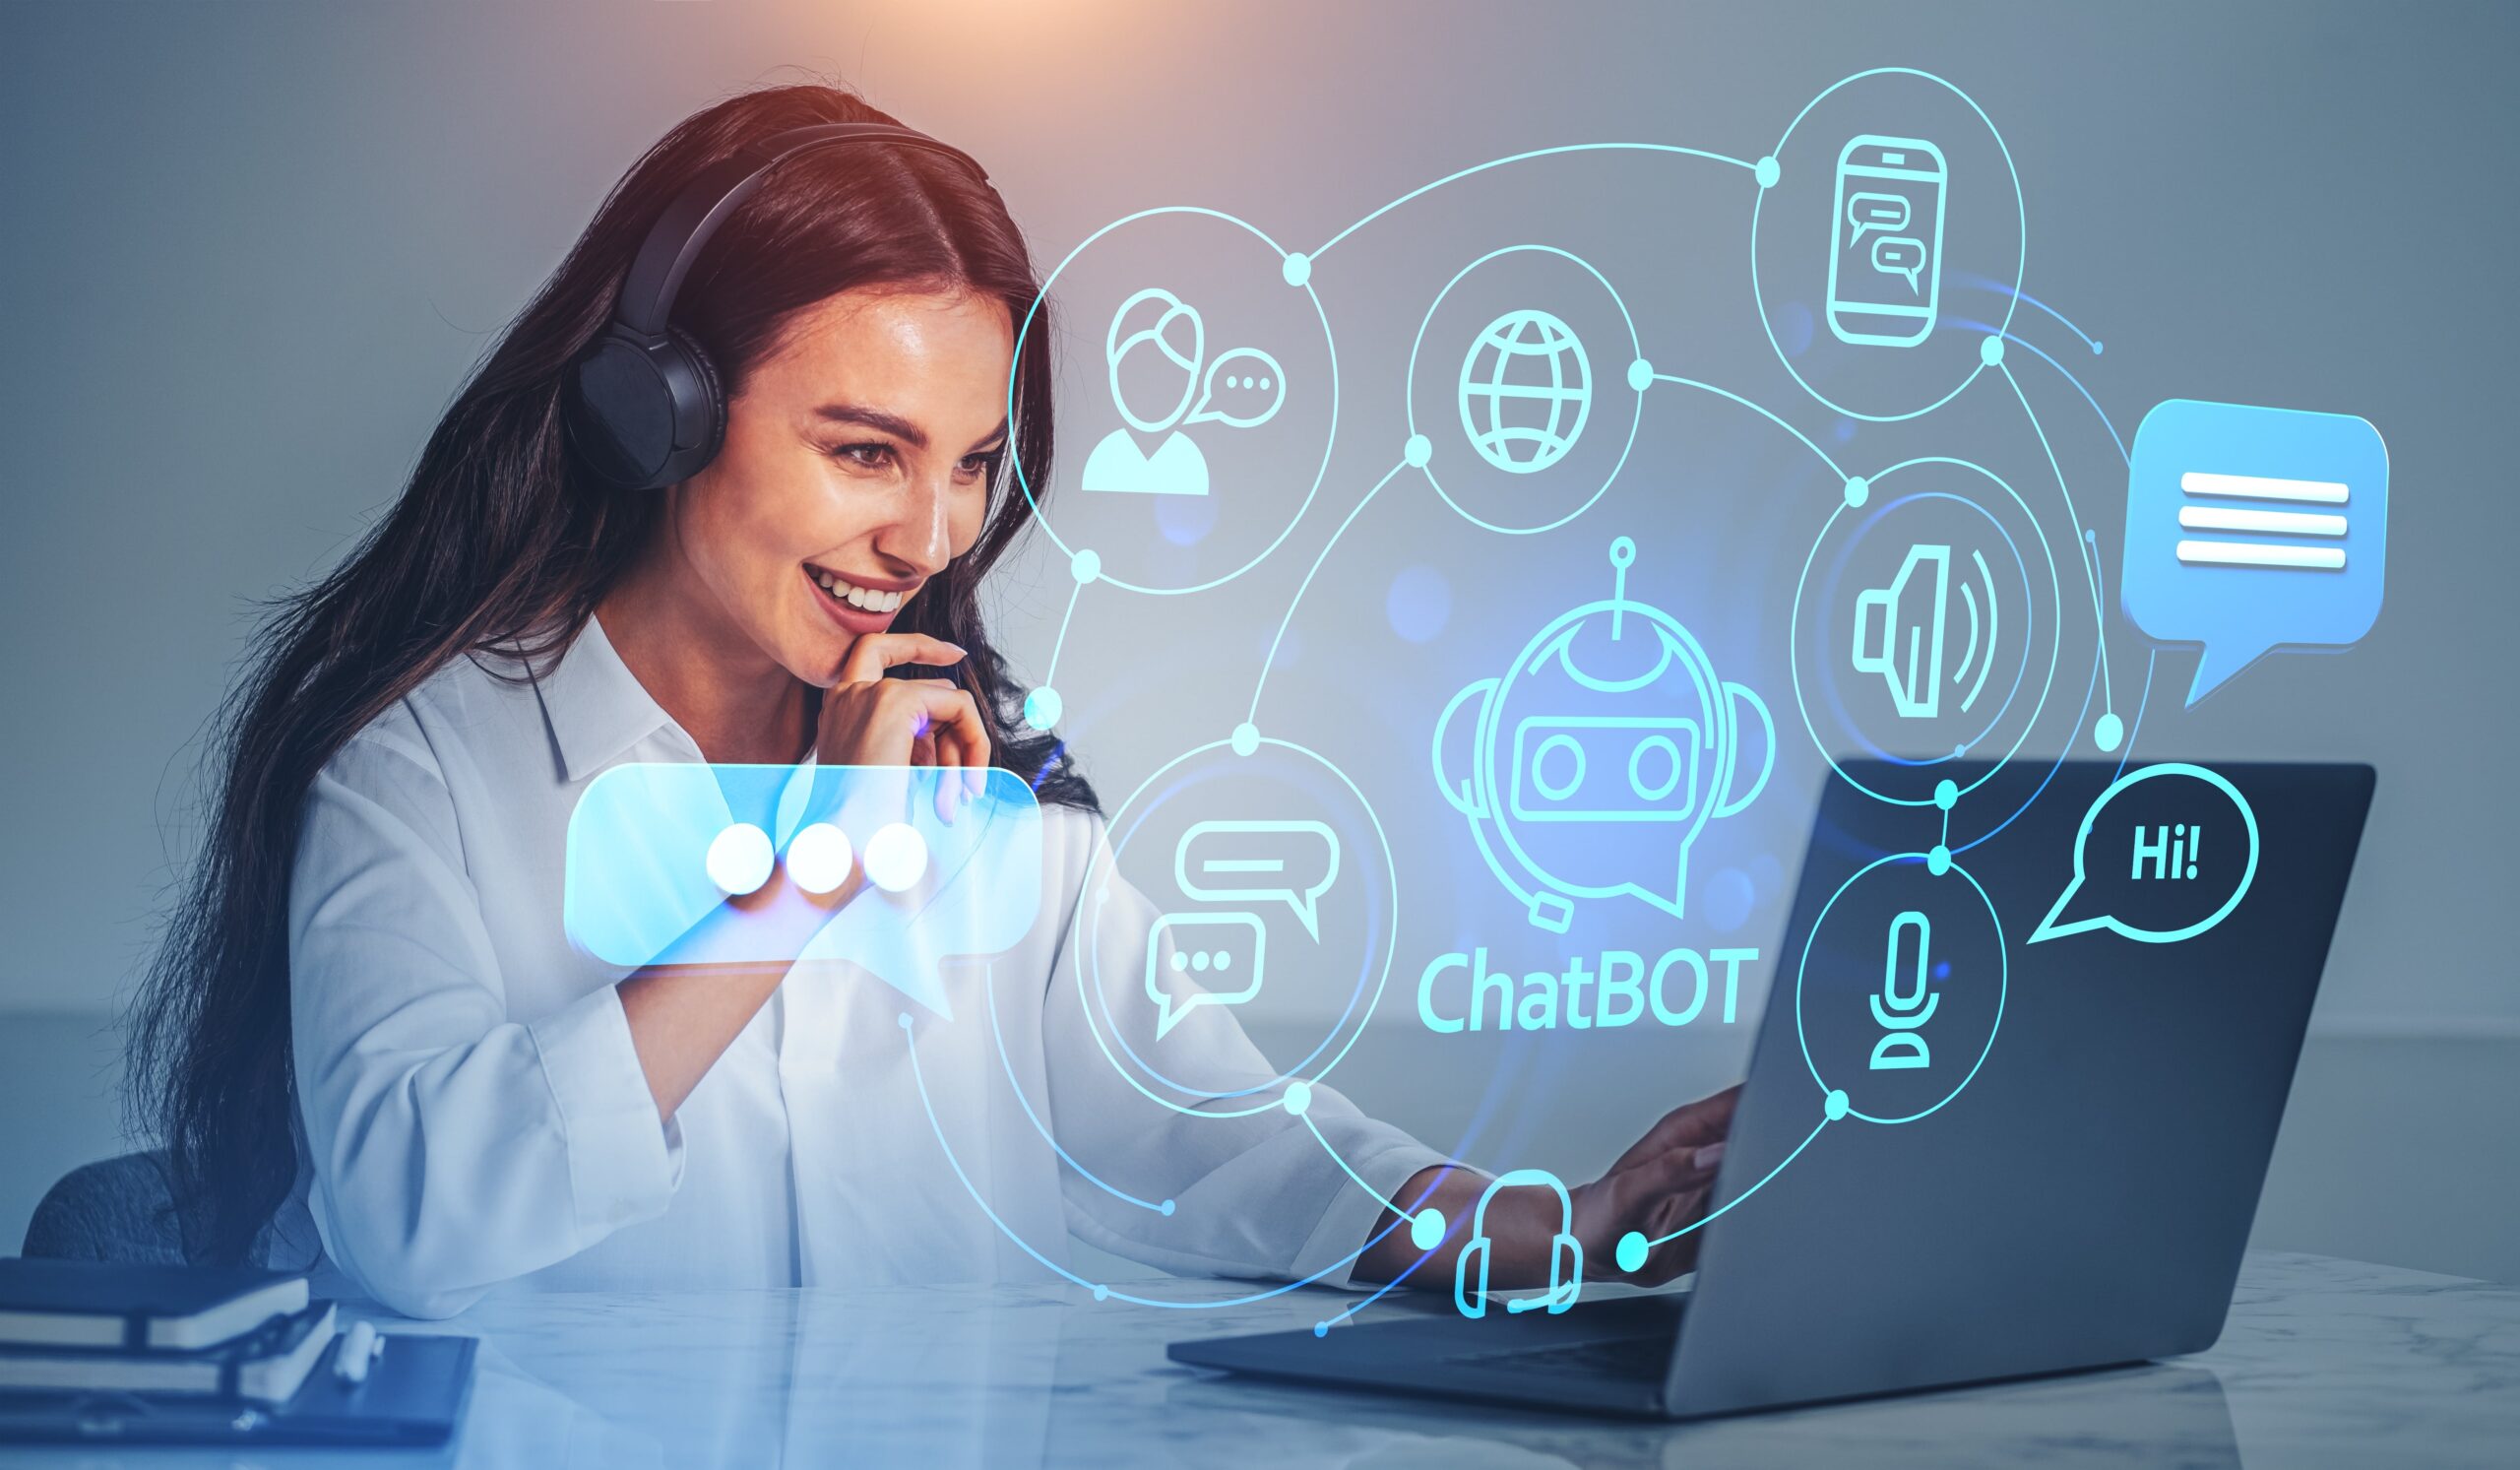 The impact of smart chatbots on employer branding